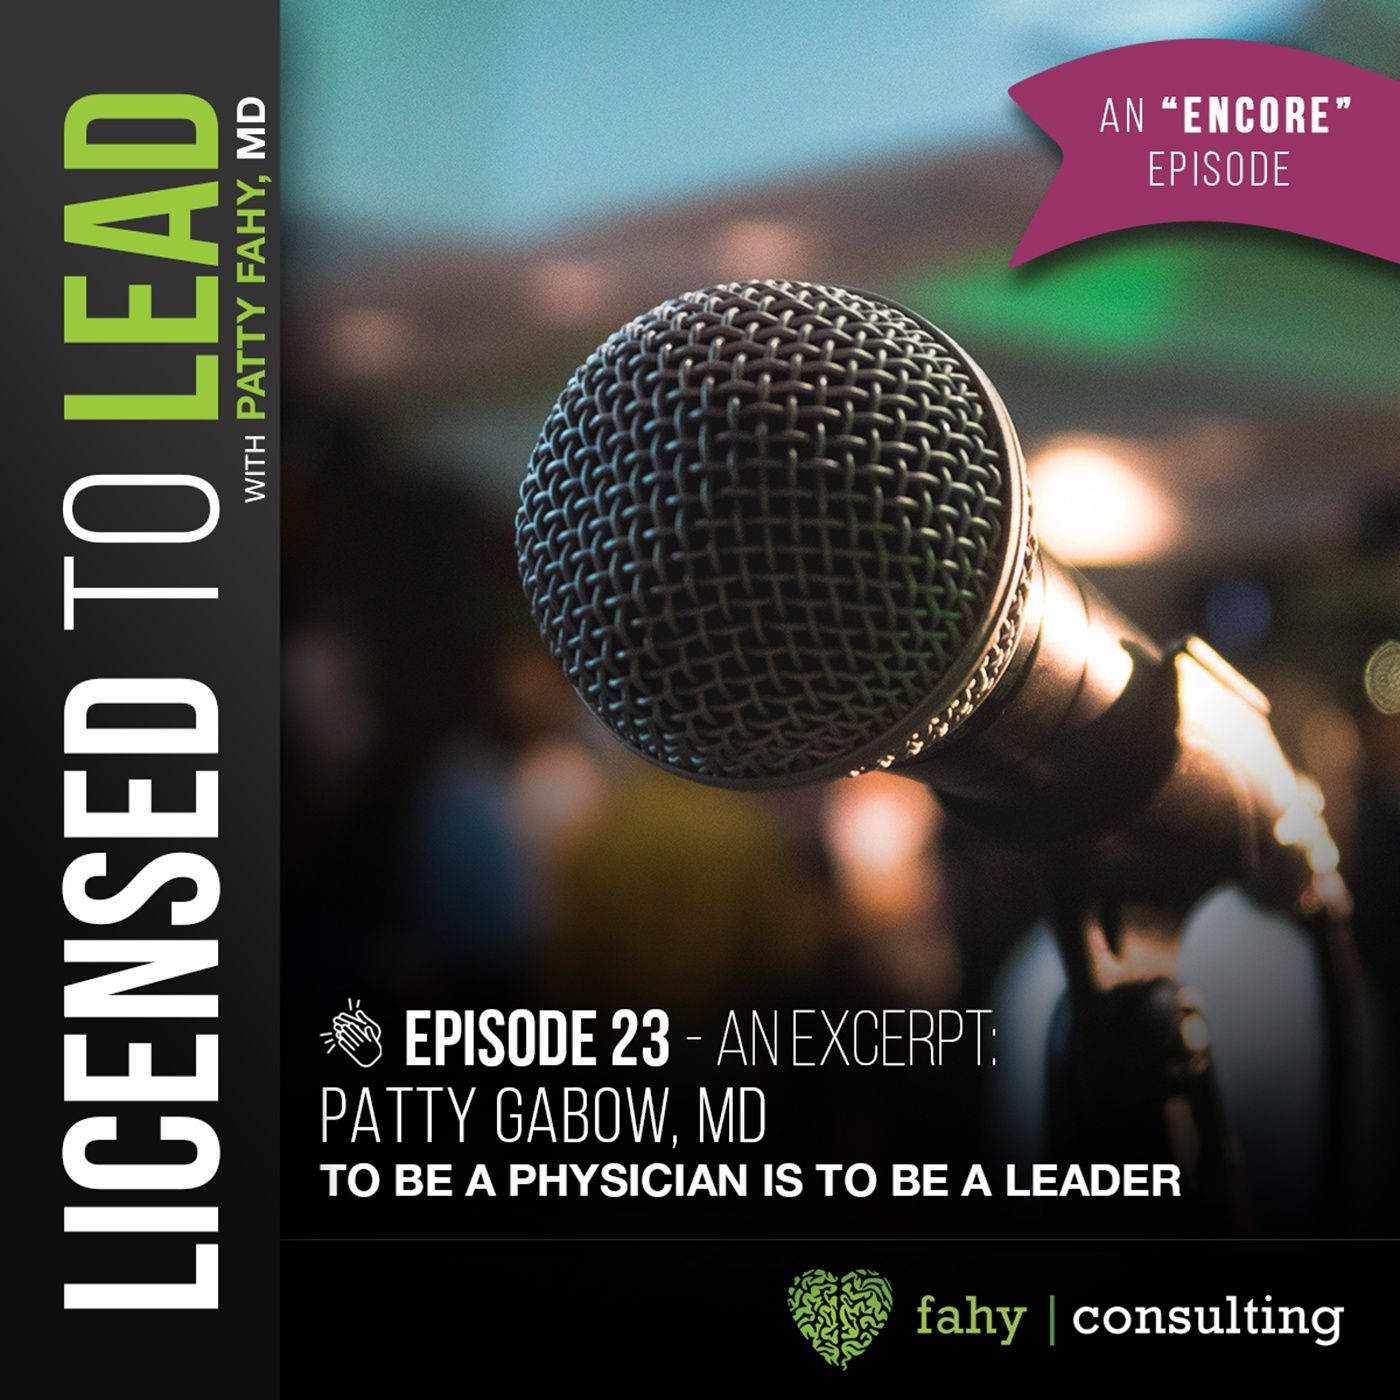 023 - To Be a Physician Is To Be a Leader